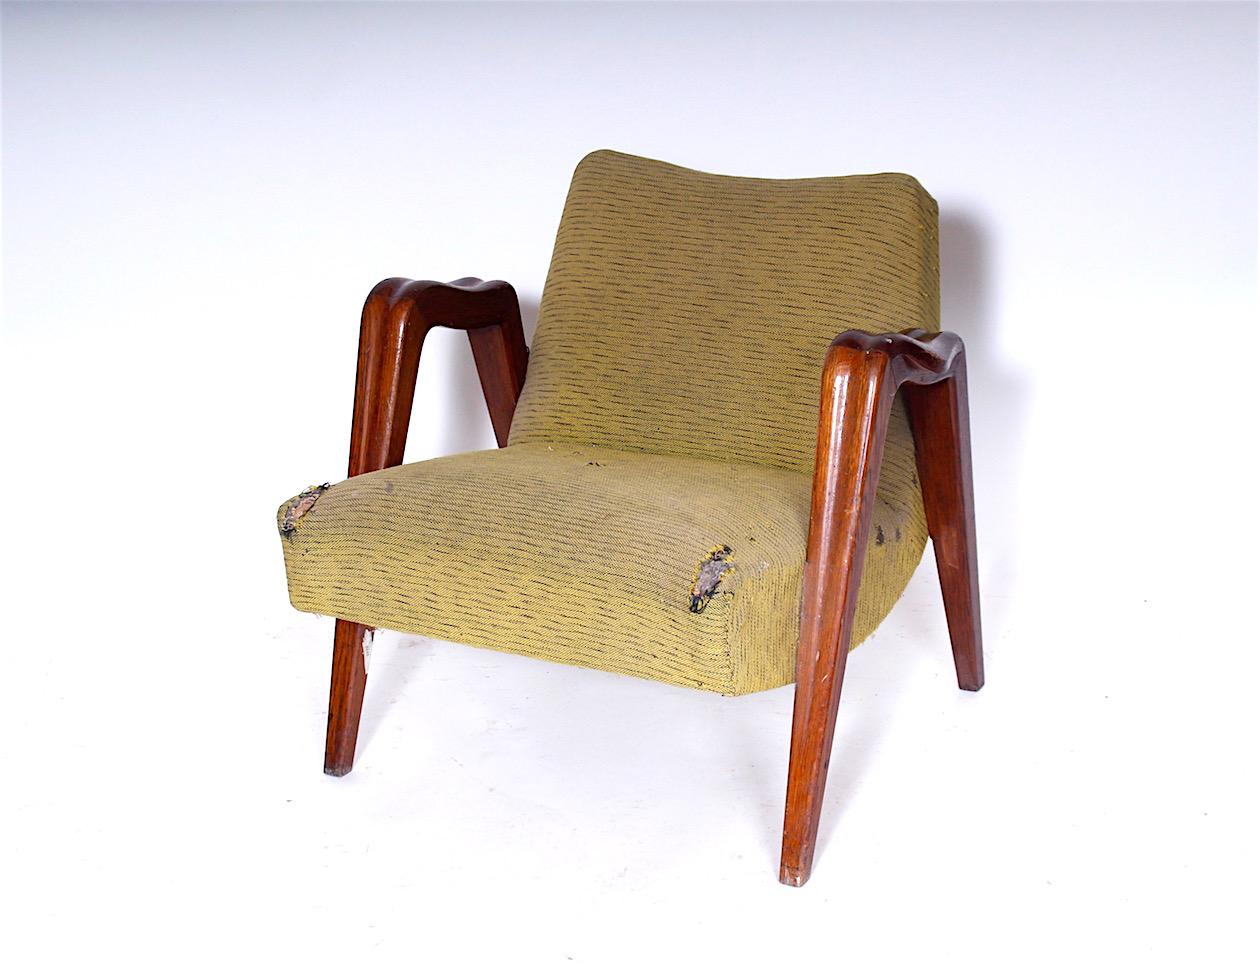 The armchair from the American designer is in its original condition, it is intended for renovation. The walnut wood is without cracks or damage.